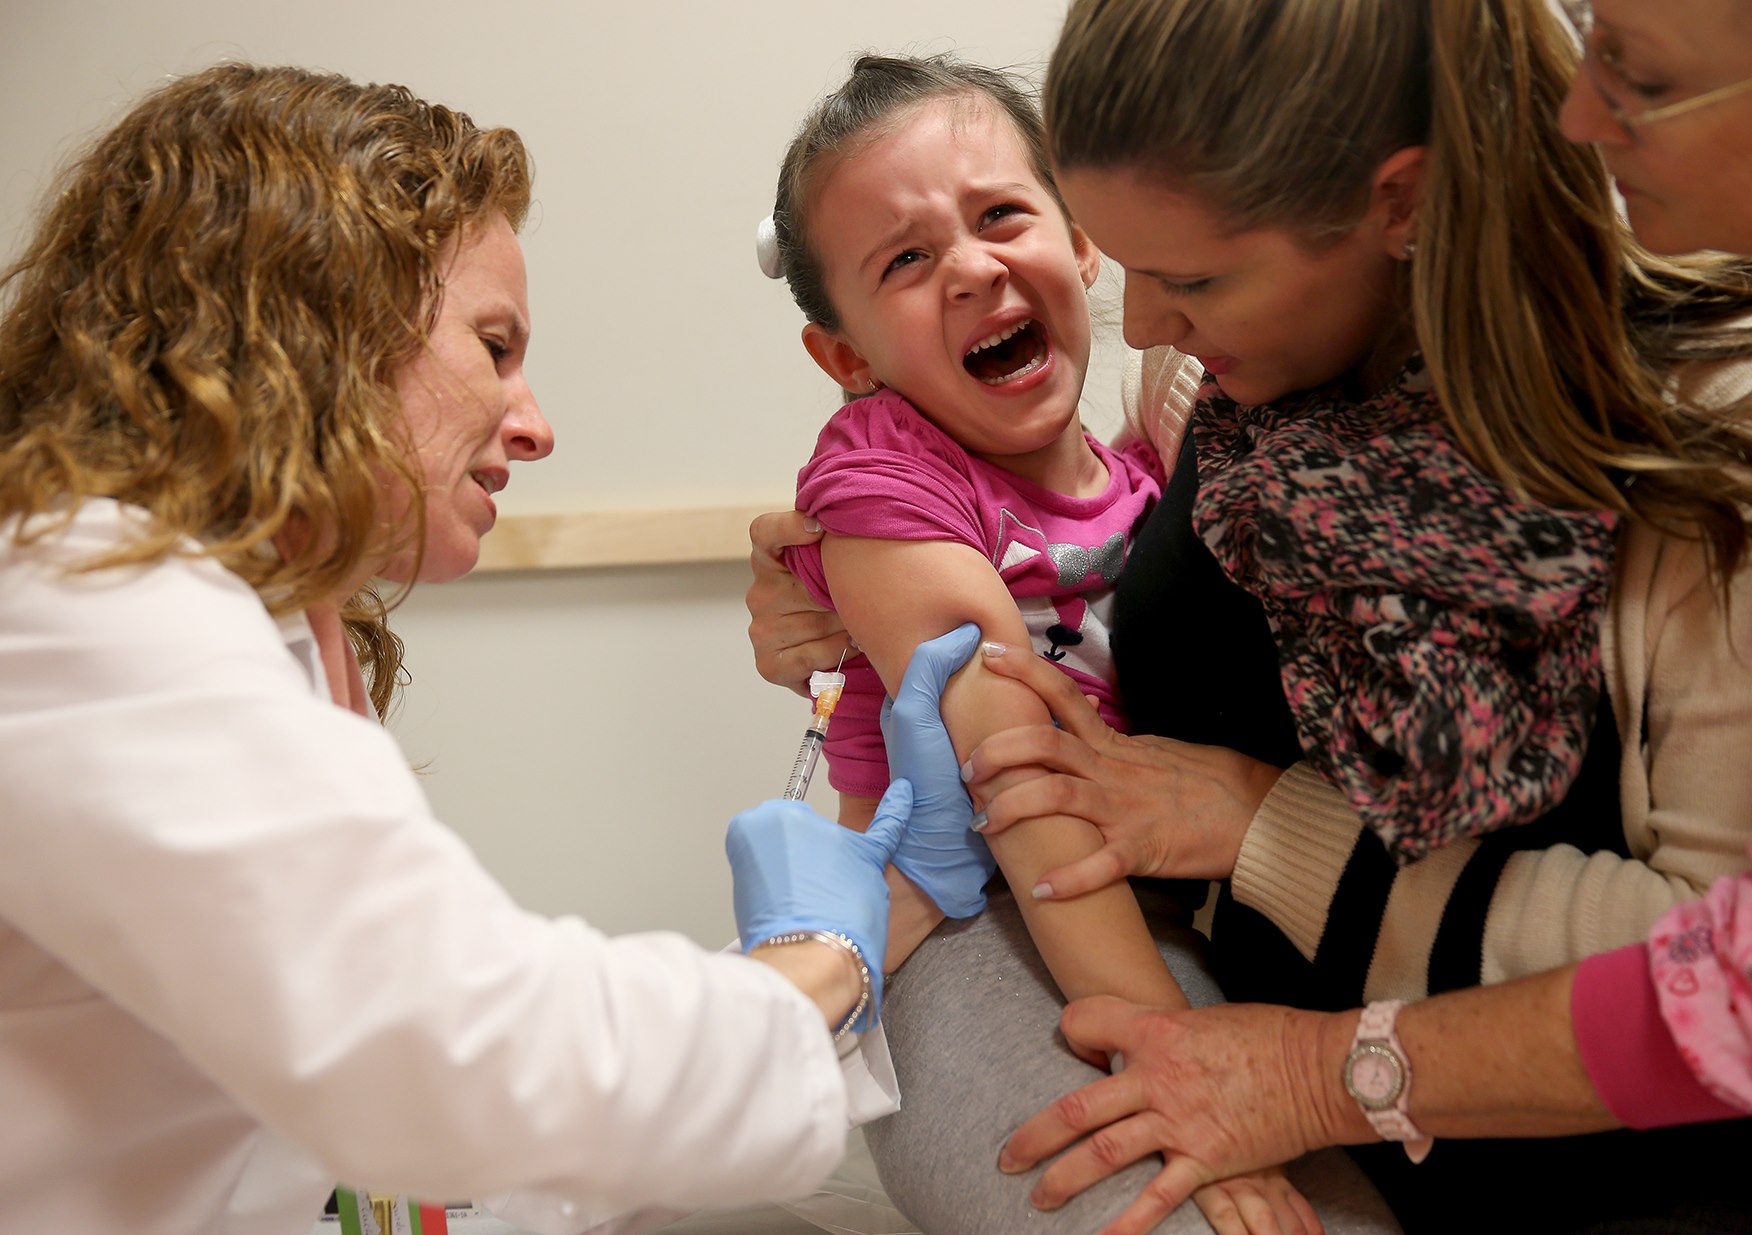 Image: Yahoo News story accidentally admits most children infected with measles outbreak were already vaccinated against the measles